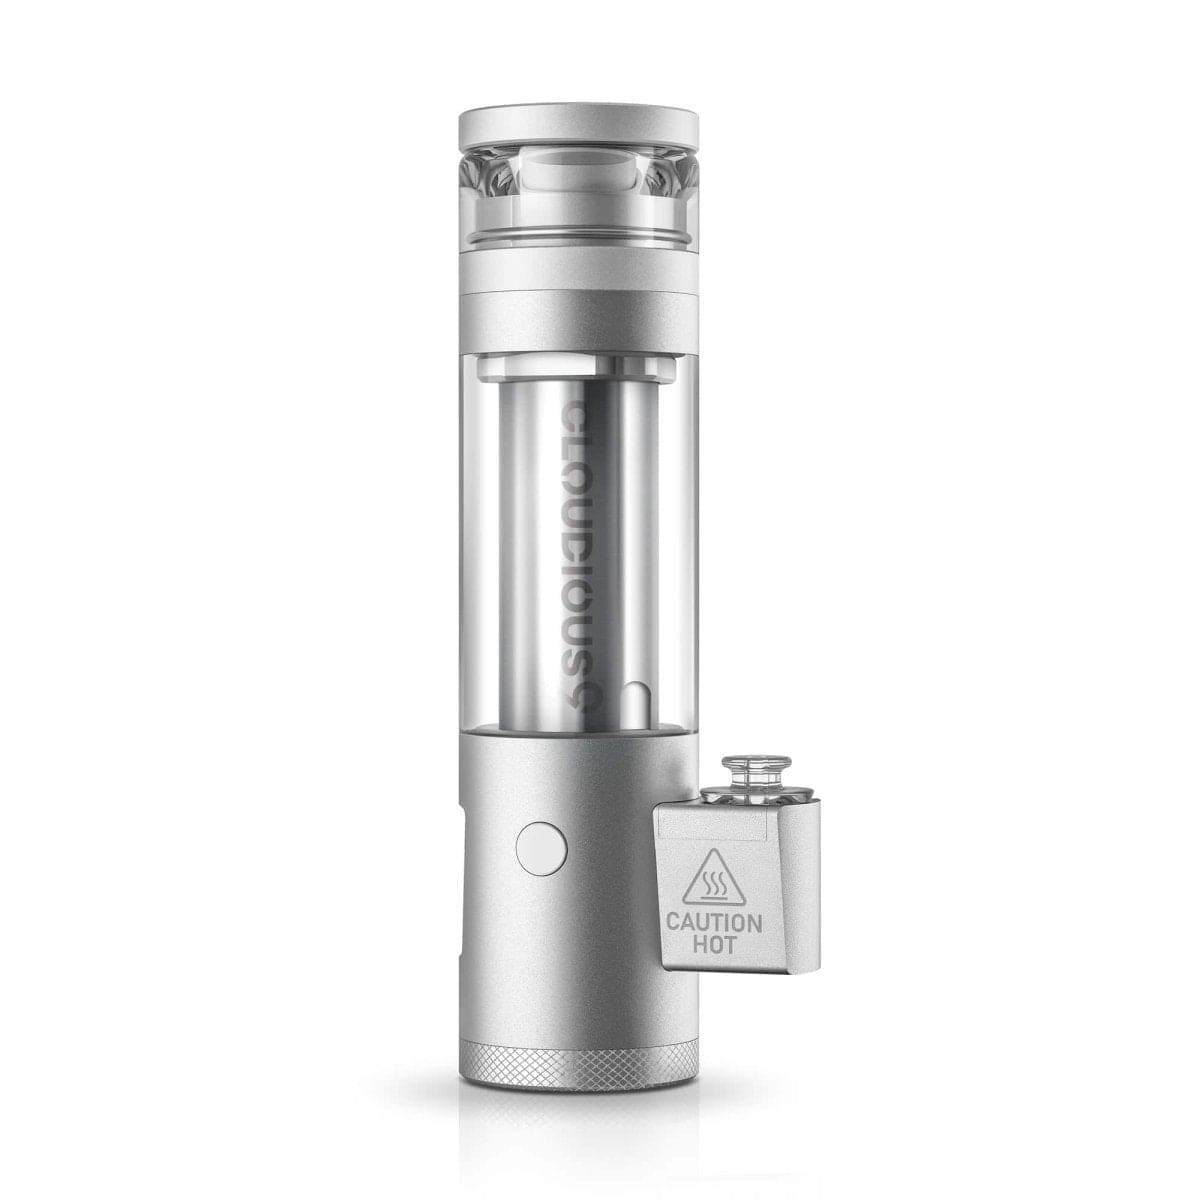 Cloudious9 Vaporizer Classic Silver Cloudious9 Hydrology9 NX Flower & Concentrate Vaporizer